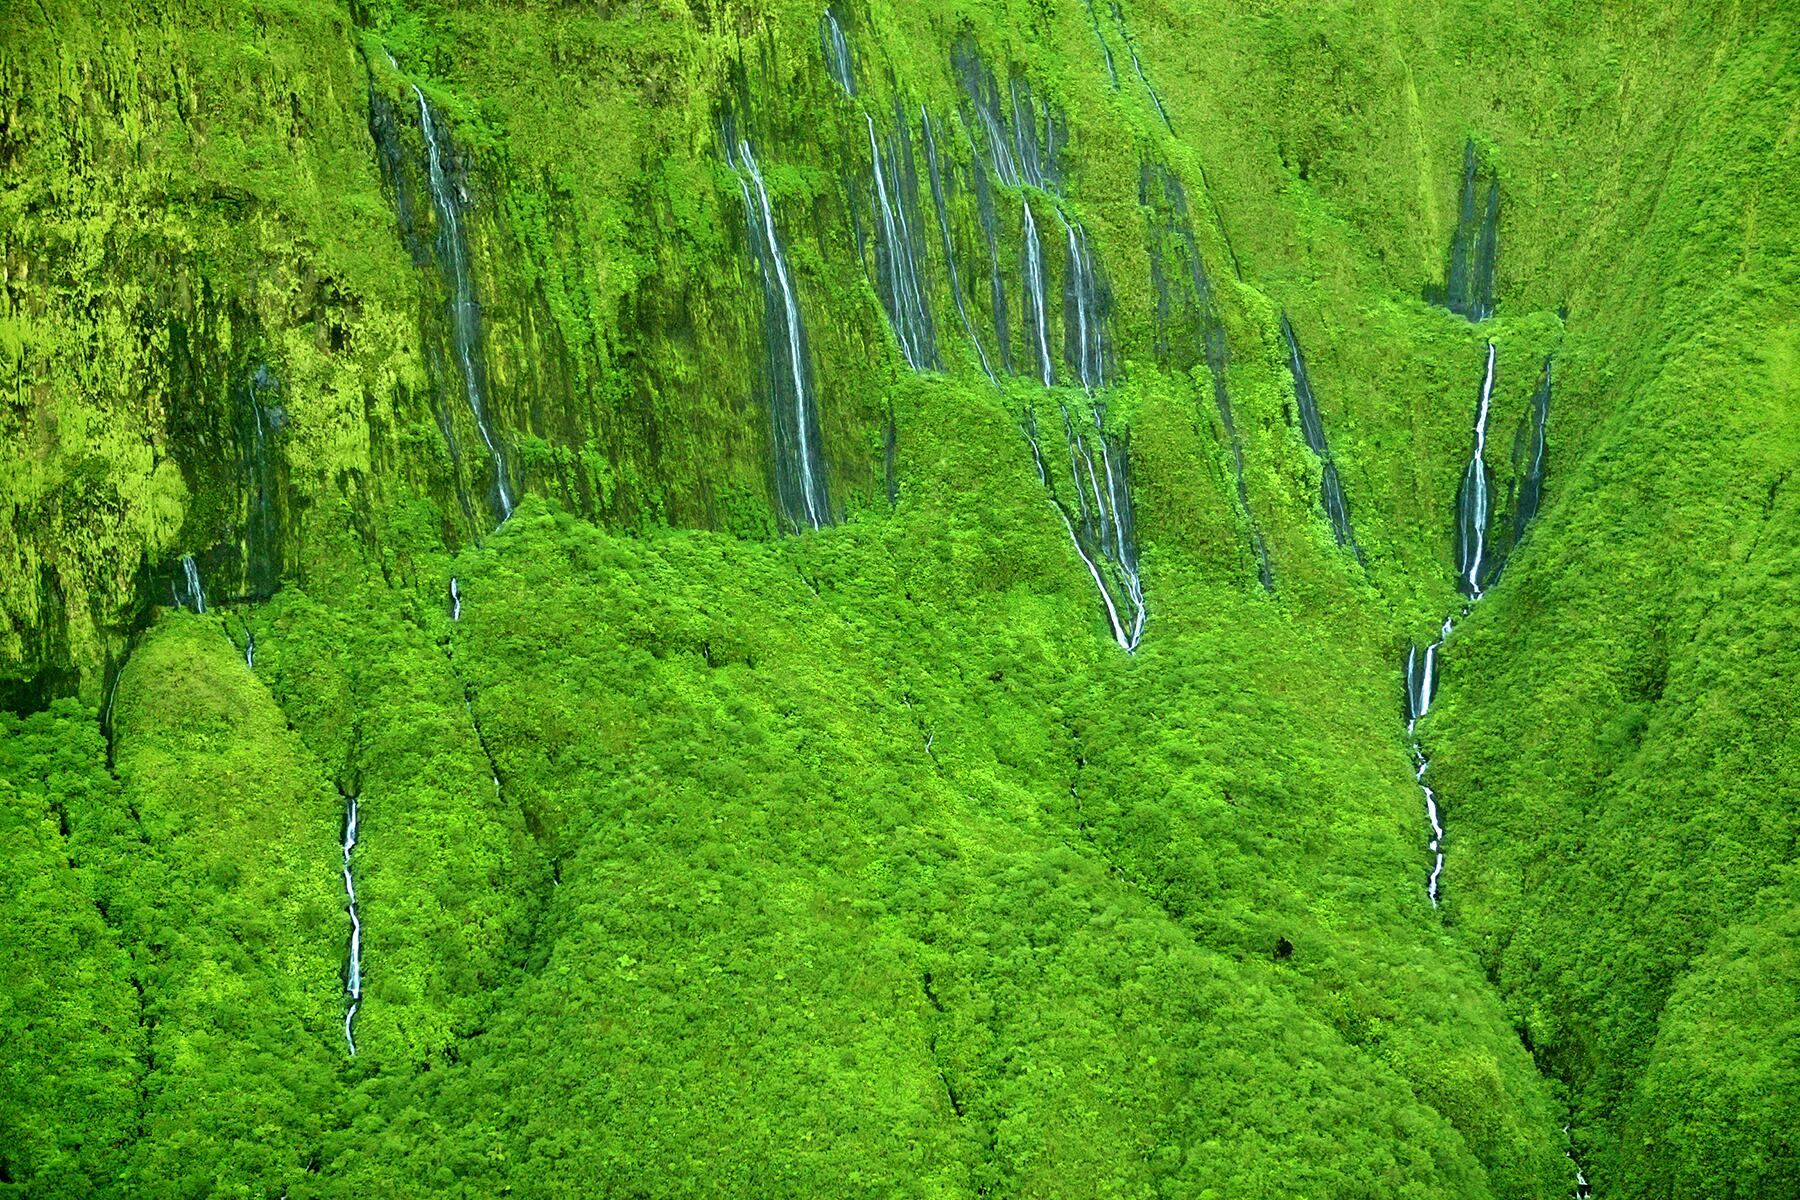 <a href='https://www.fodors.com/world/north-america/usa/hawaii/big-island/experiences/news/photos/18-ultimate-things-to-do-on-hawaiis-big-island#'>From &quot;25 Ultimate Things to Do on Hawaii’s Big Island: Hover by Helicopter Along a Sheer 3,000-Foot Valley Wall&quot;</a>